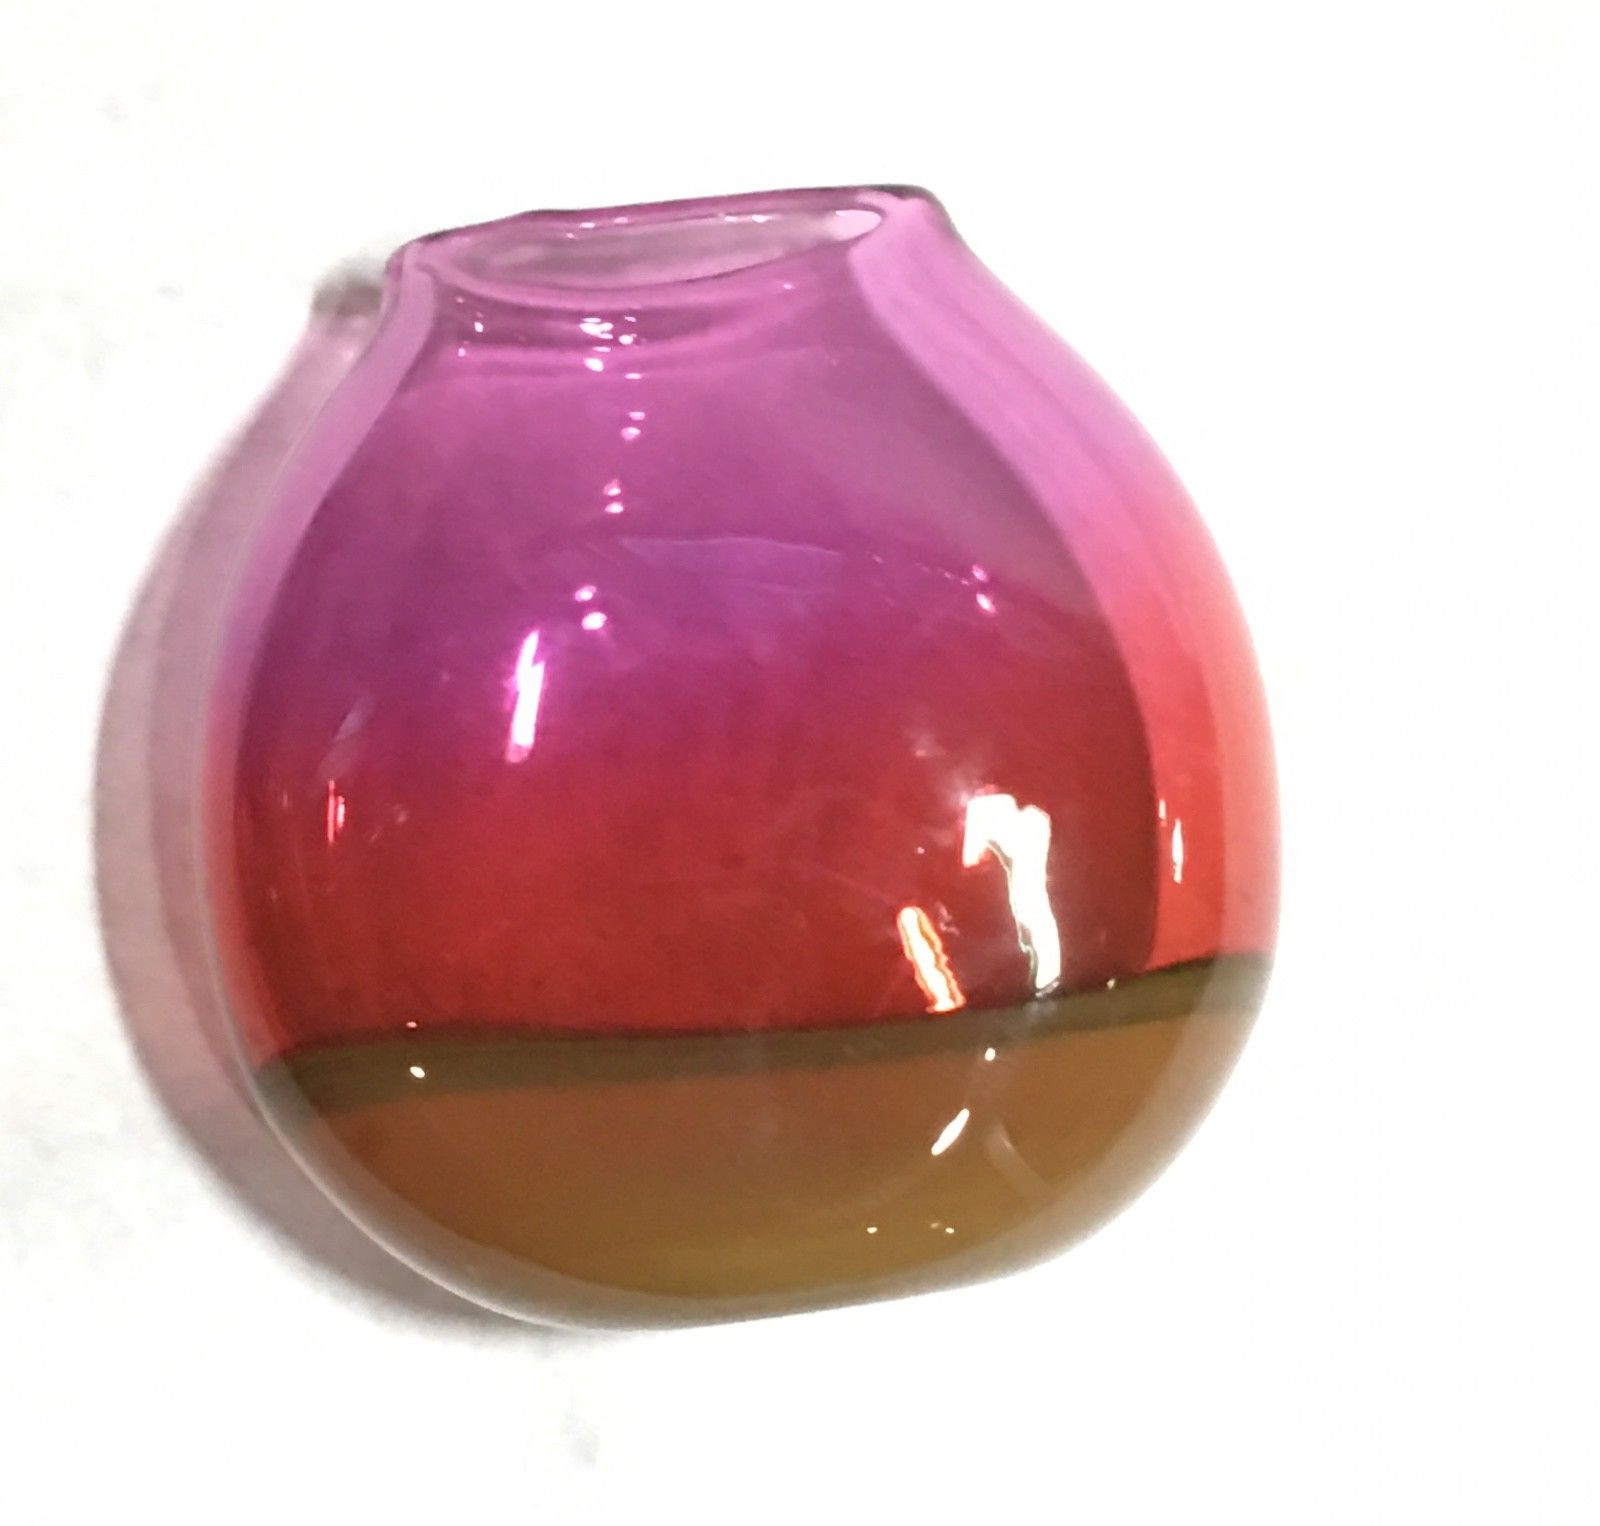 26 Cute Vidrios San Miguel Glass Vase 2024 free download vidrios san miguel glass vase of hand made glass vase rosy aubergine and caramel colors 135 00 throughout hand made glass vase rosy aubergine and caramel colors 1 of 5only 1 available hand m